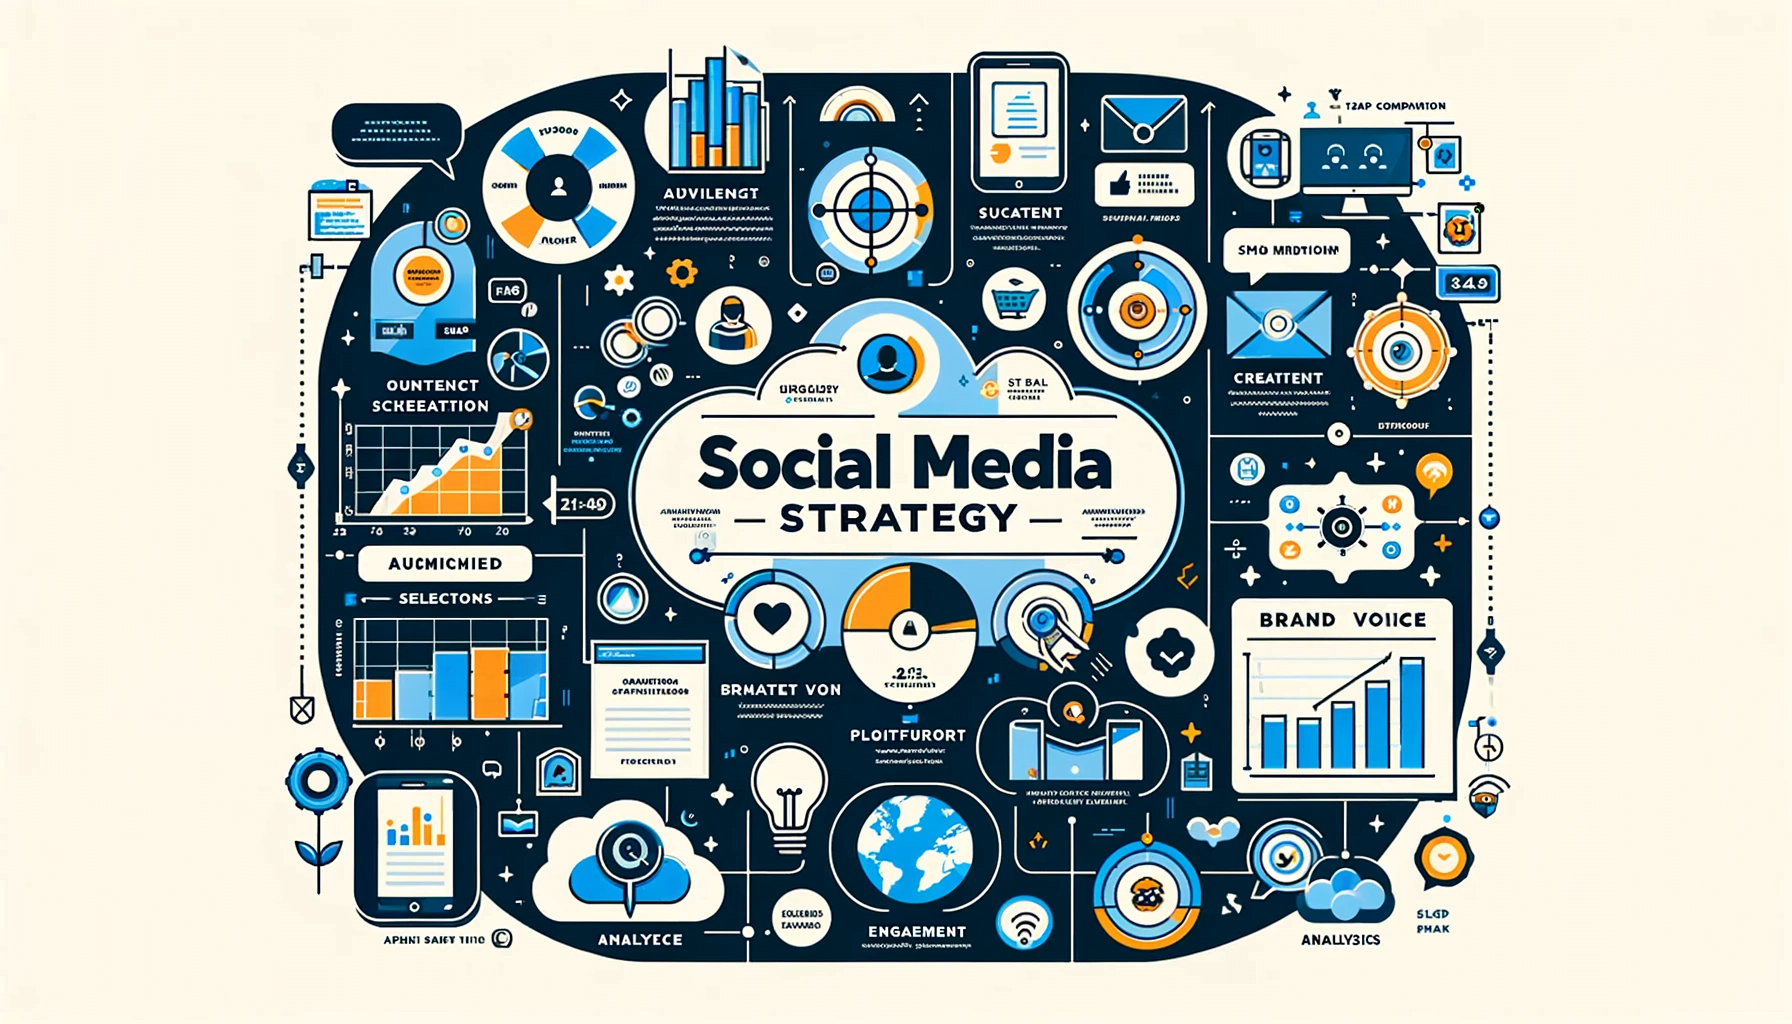 Infographic detailing essential elements of social media strategy, including audience analysis, content creation, and analytics.